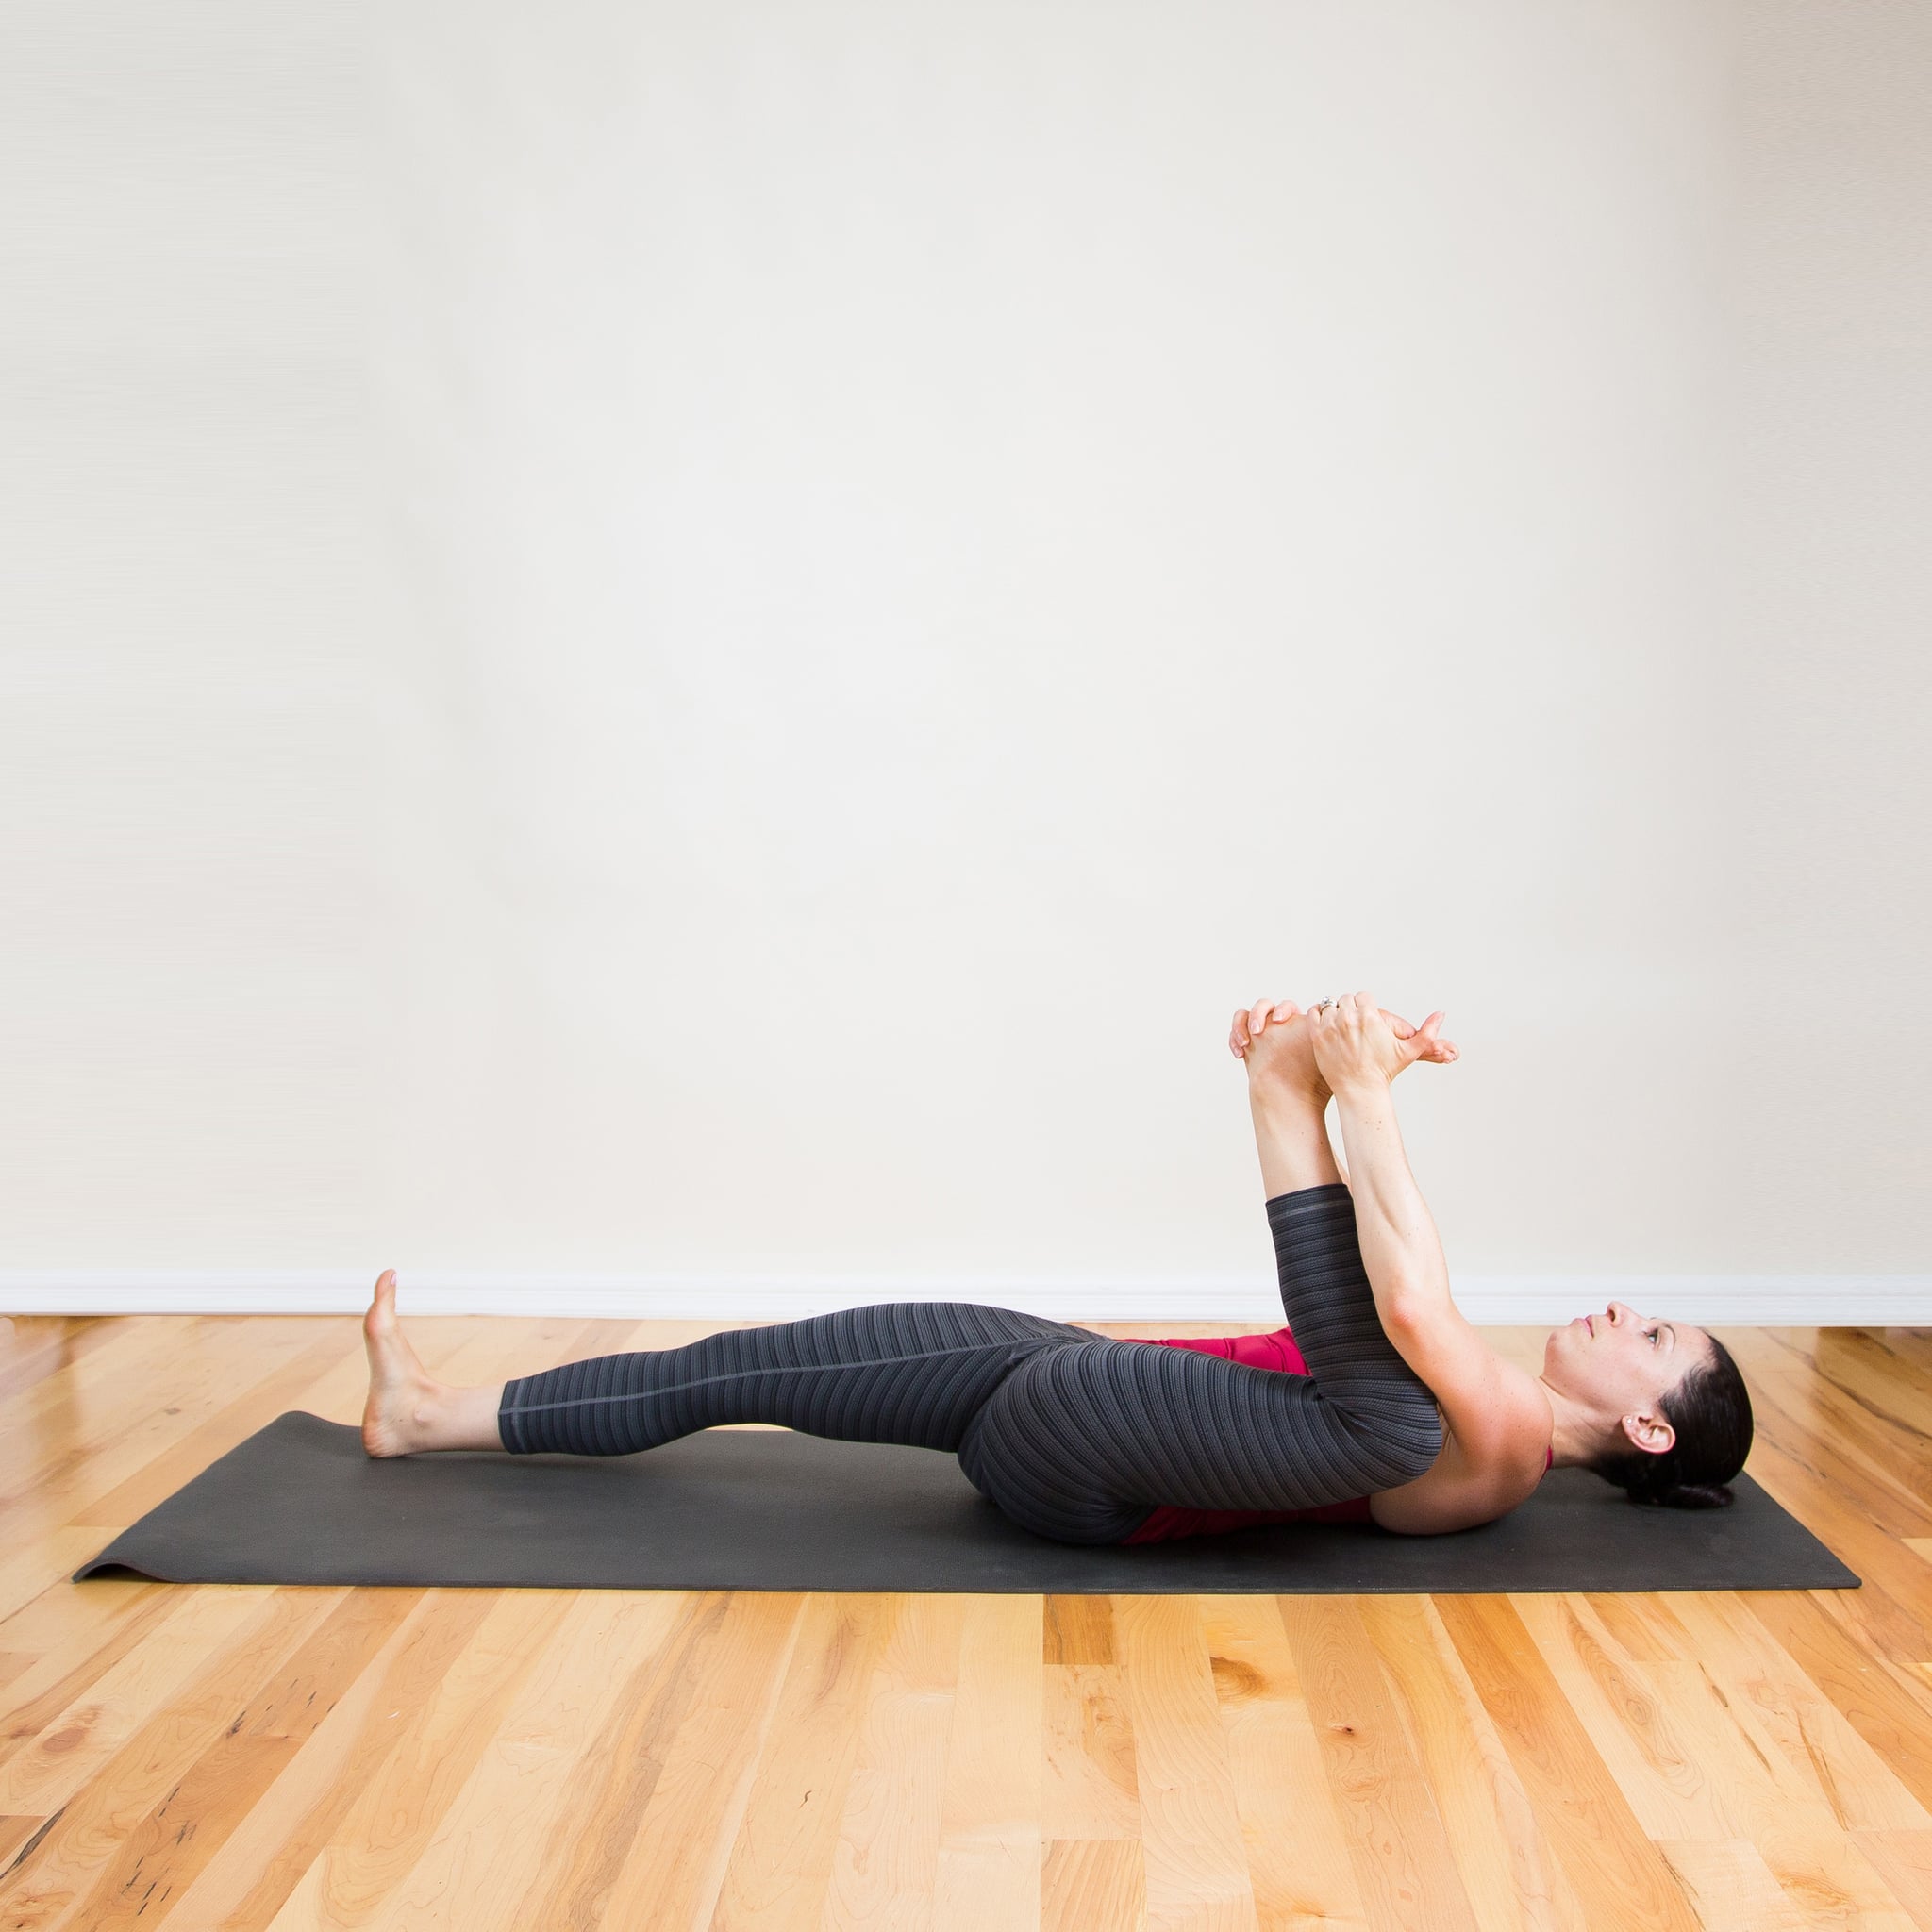 Endure Yoga - Reclined lizard or half happy baby is a pose that creates  length in the hips and hamstrings while cooling and calming the mind. After  a challenging or workout or